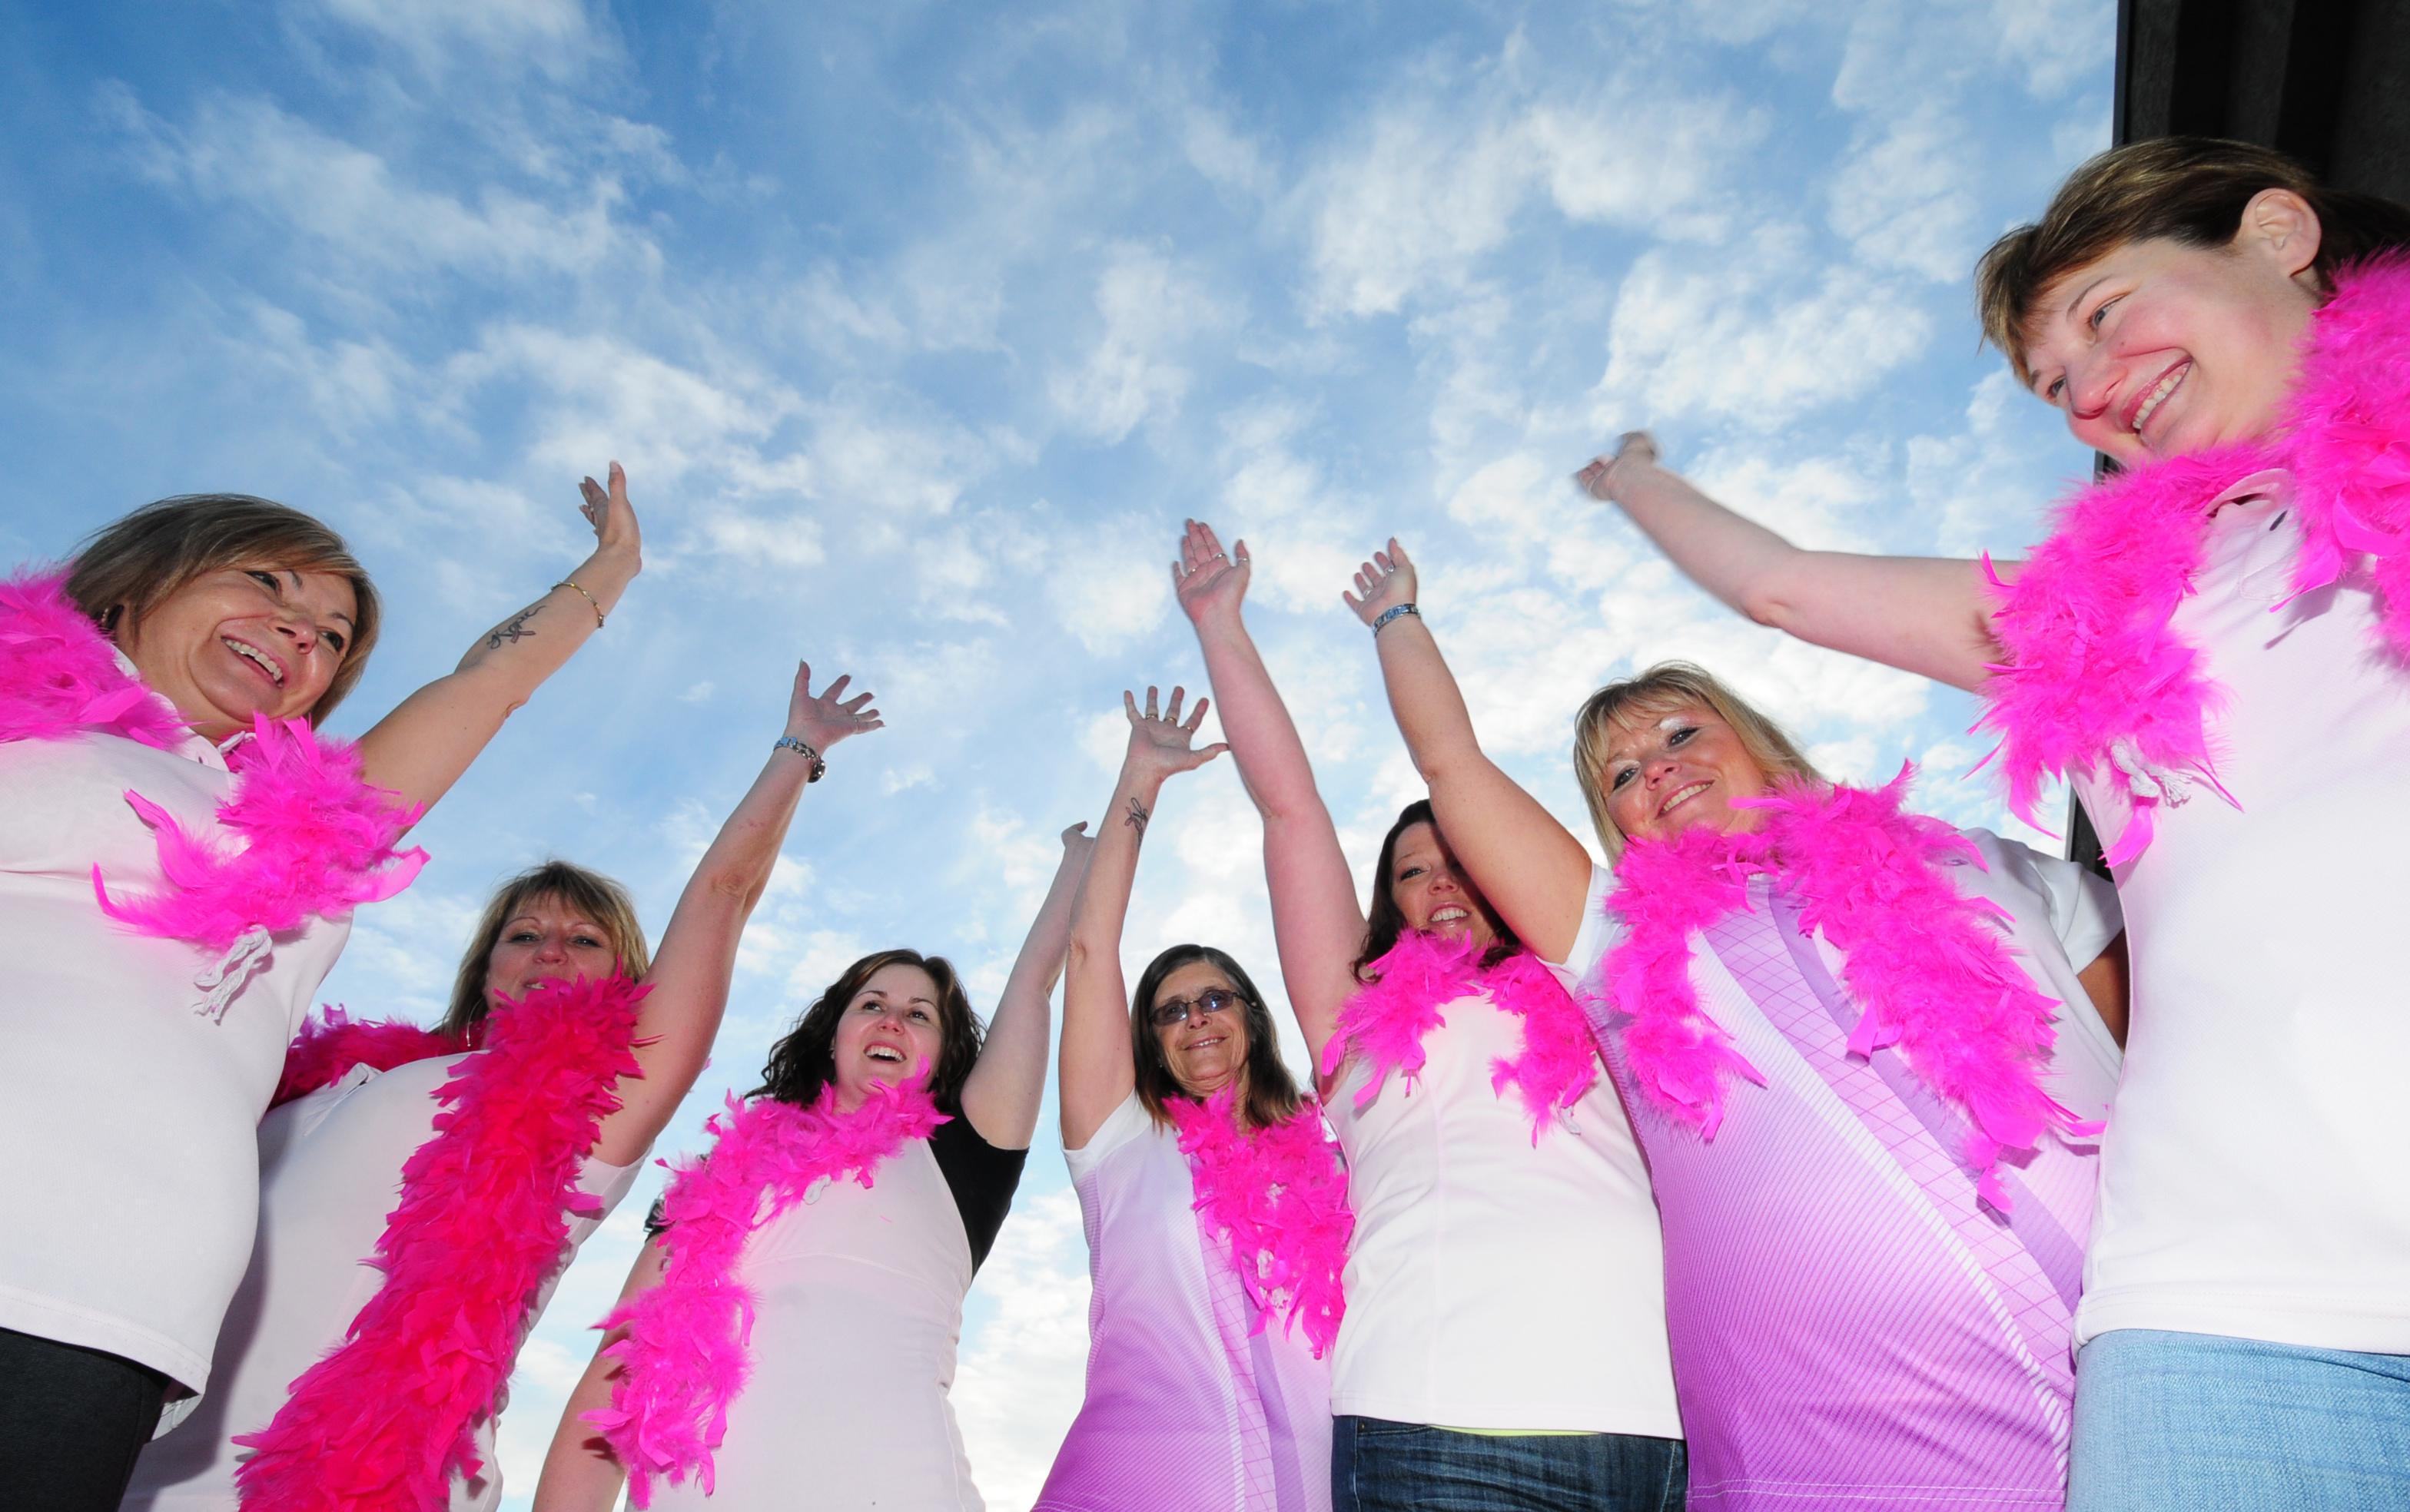 TEAMWORK - Seven of the 12 members of 'Perky in Pink' raise their hands in a cheer as this is their sixth year participating in the Weekend to End Women's Cancers in Calgary.